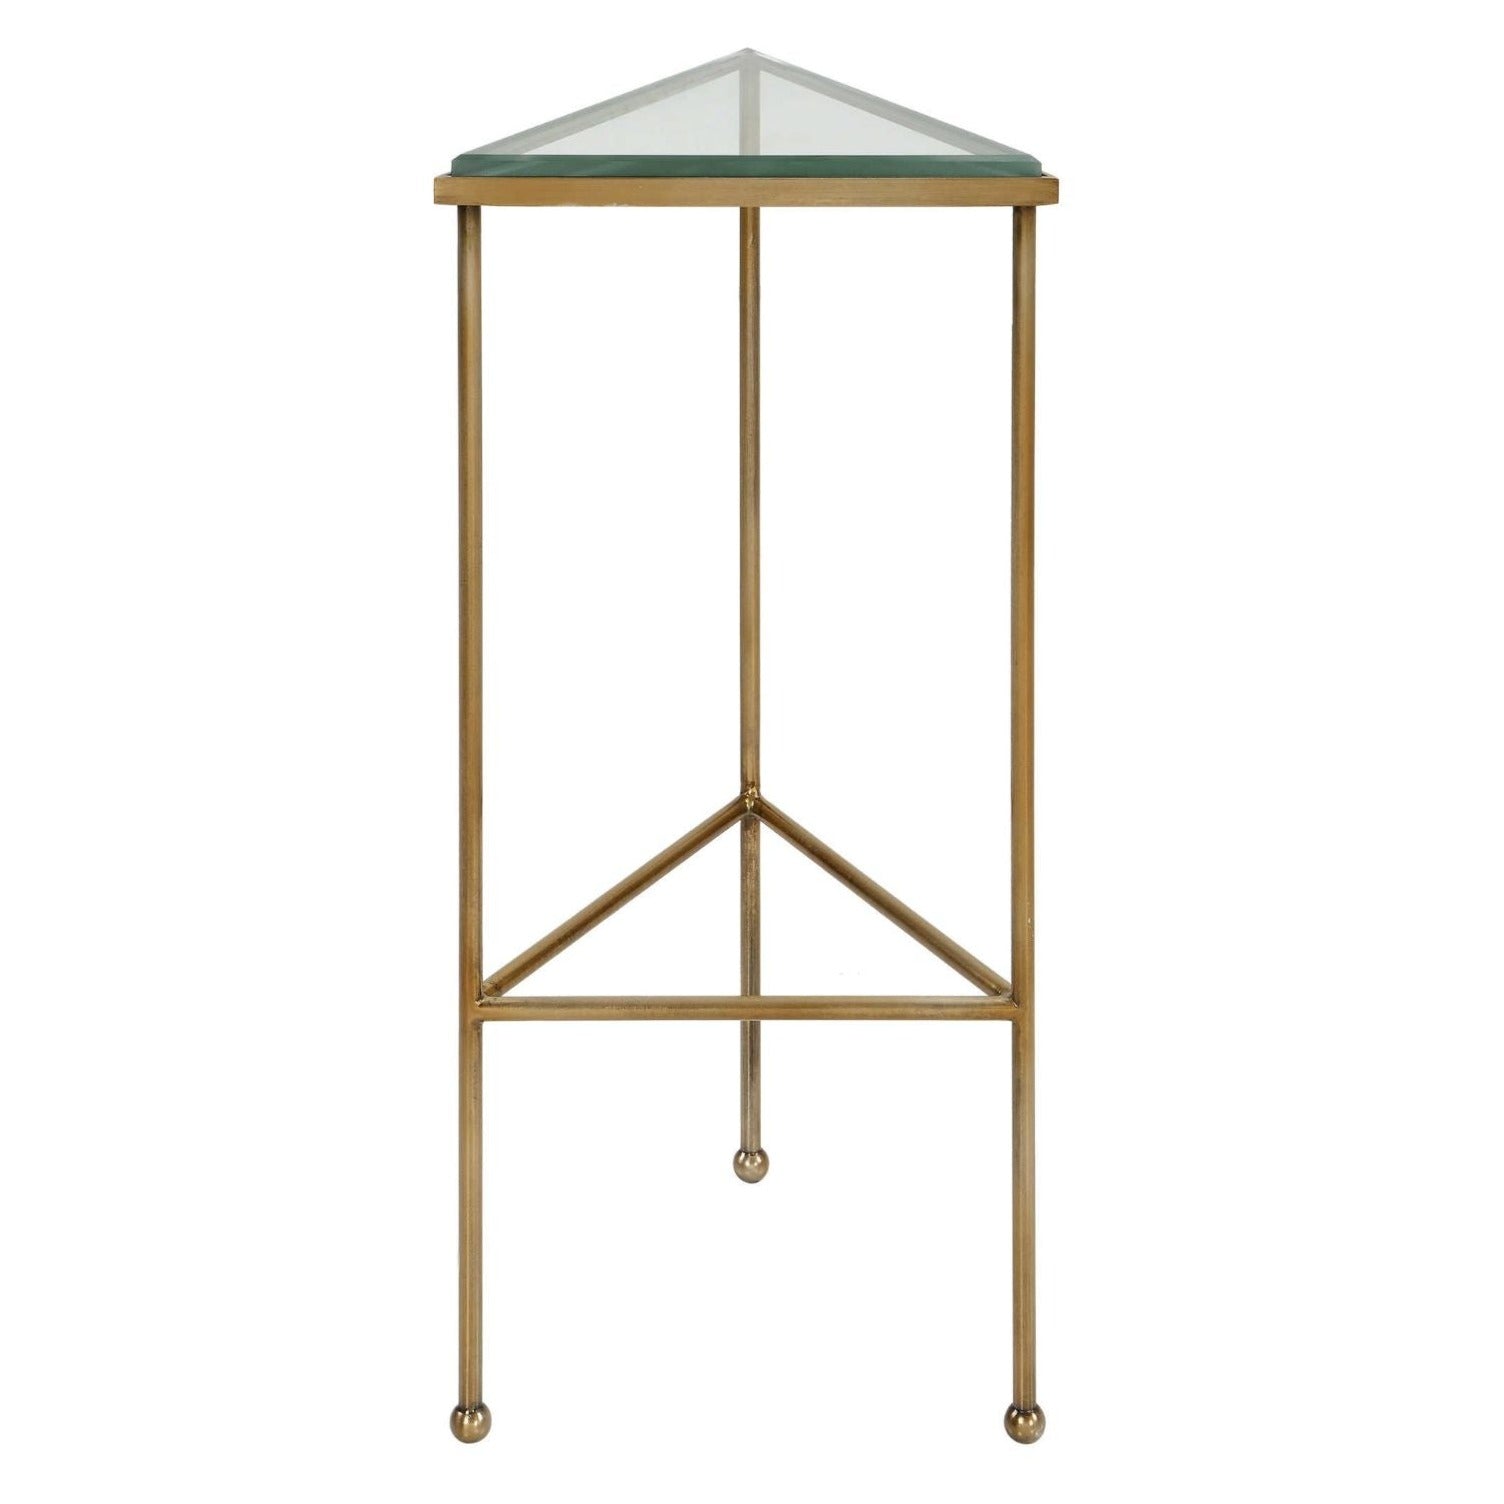 This is a triangle shaped drink table in gold metal and glass shelves.